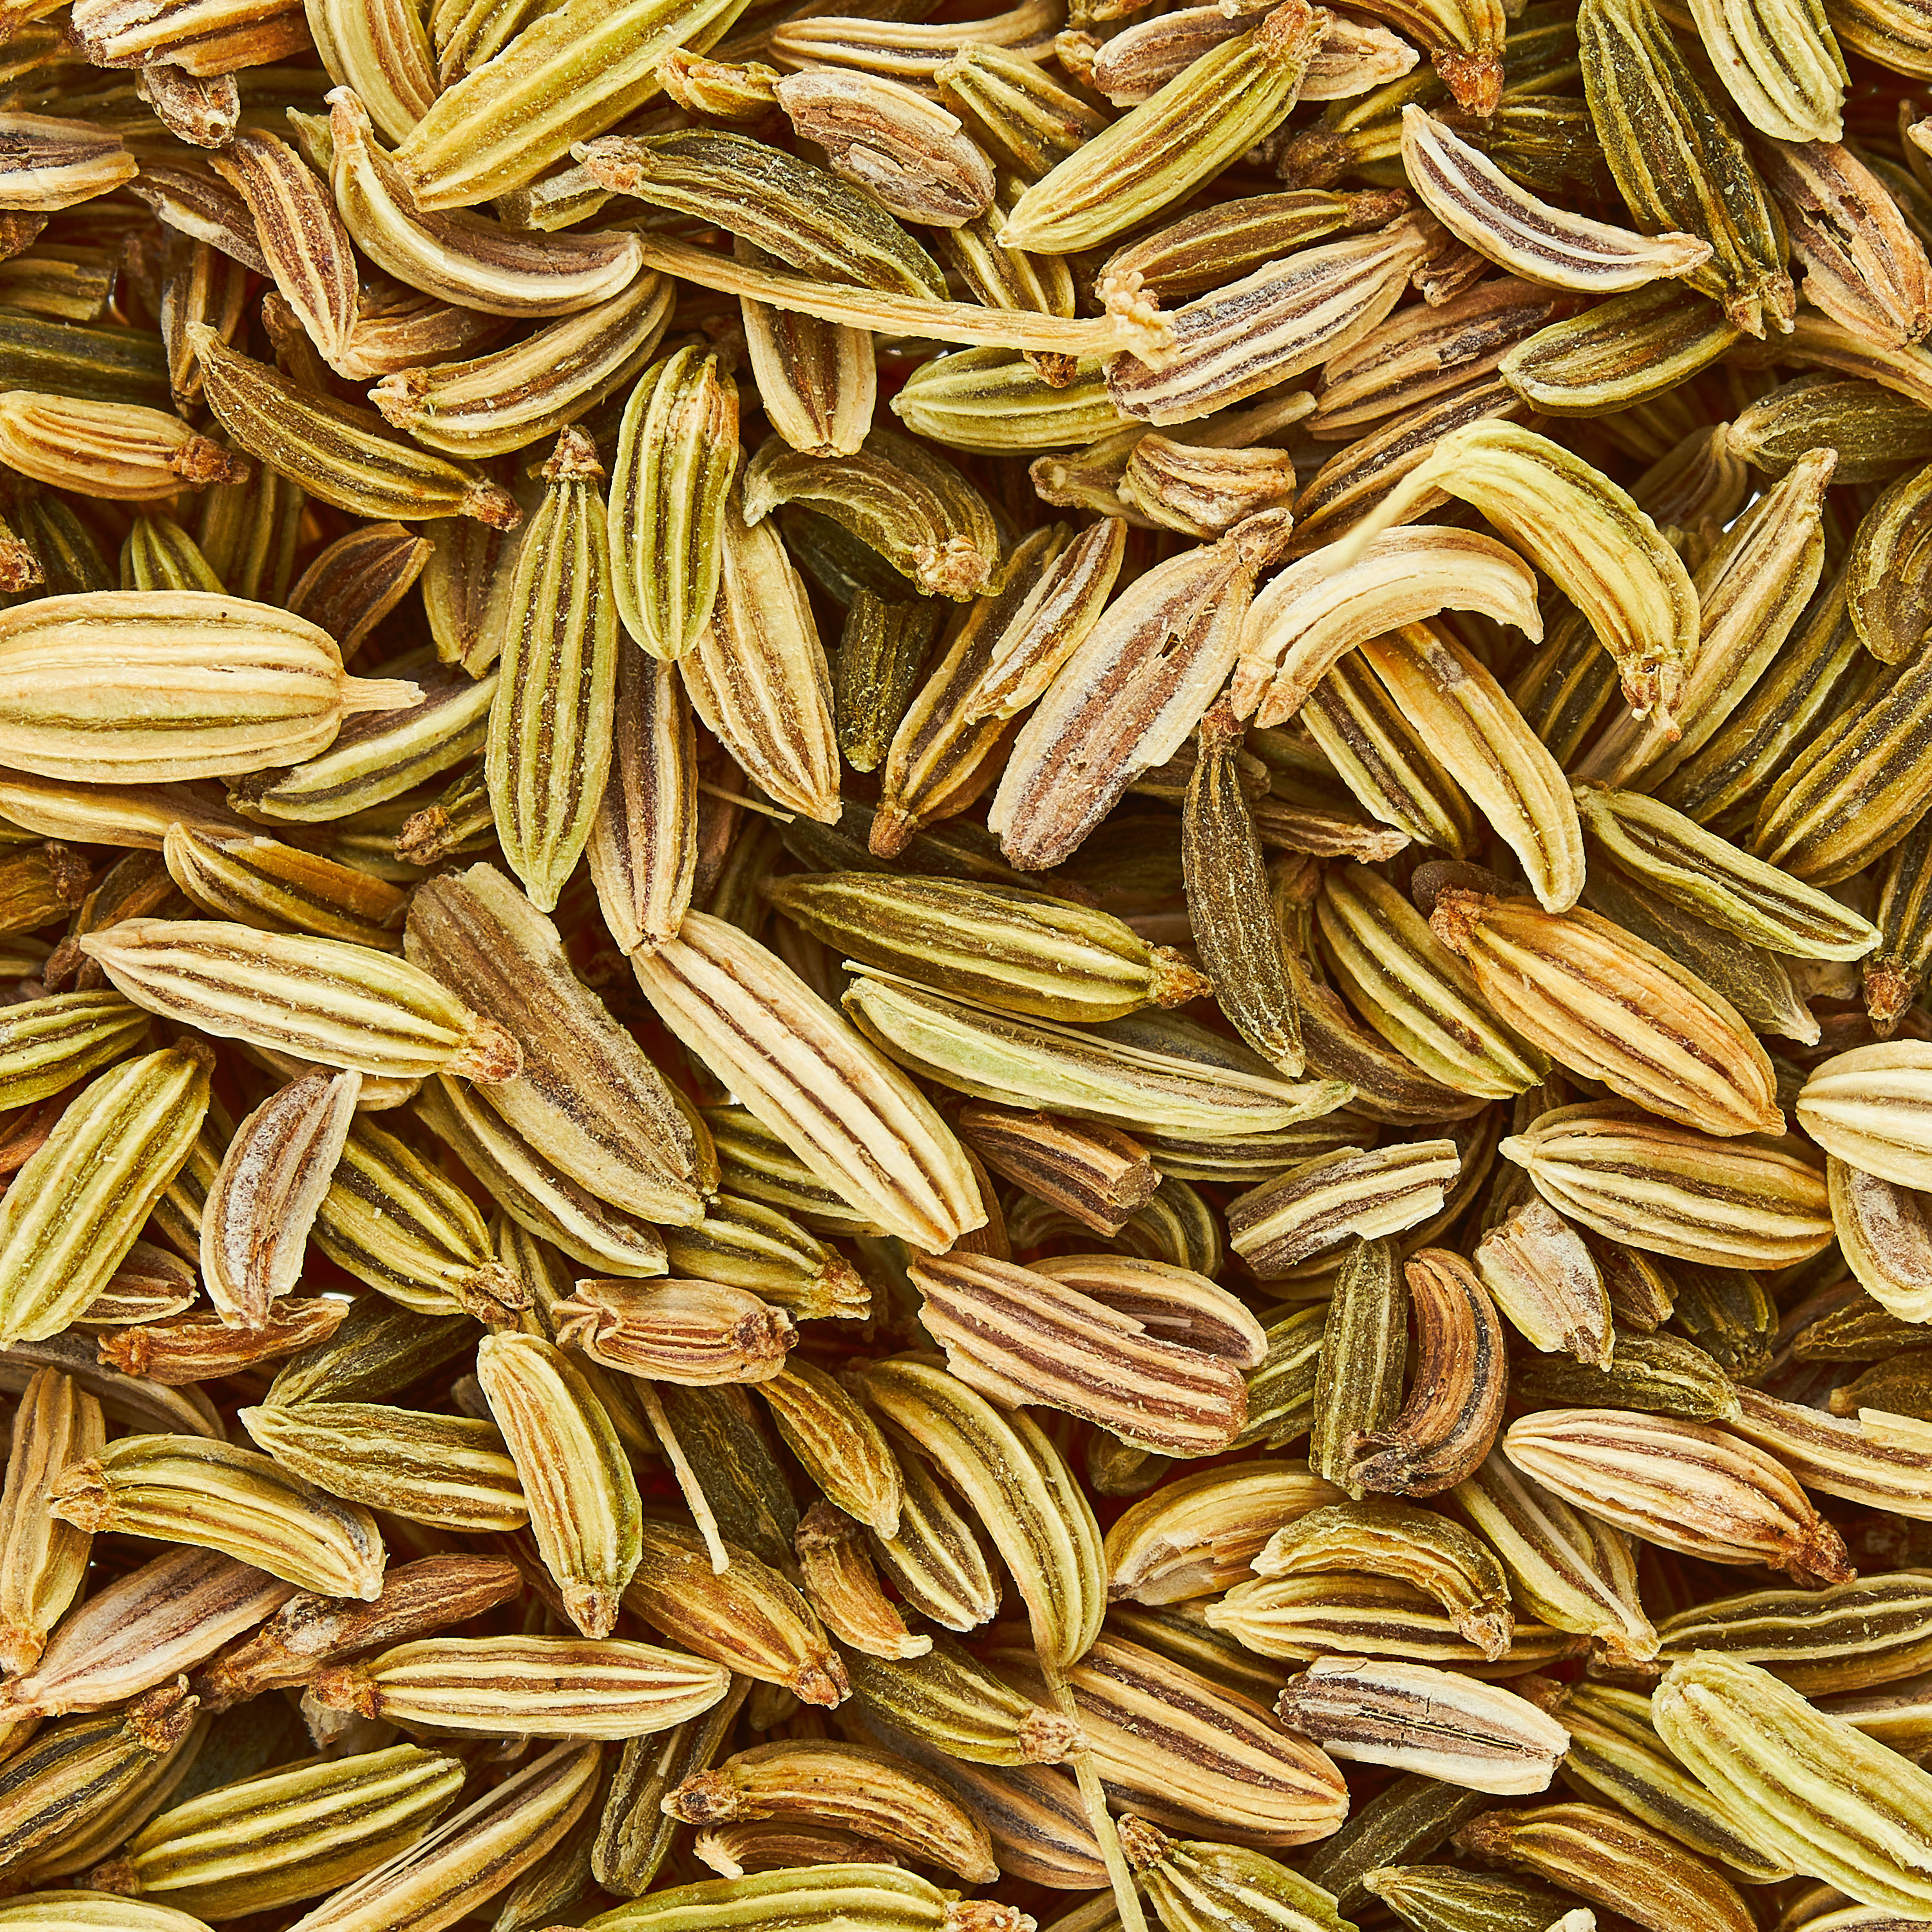 Great Value Organic Fennel Seed, 1.6 oz - image 3 of 7